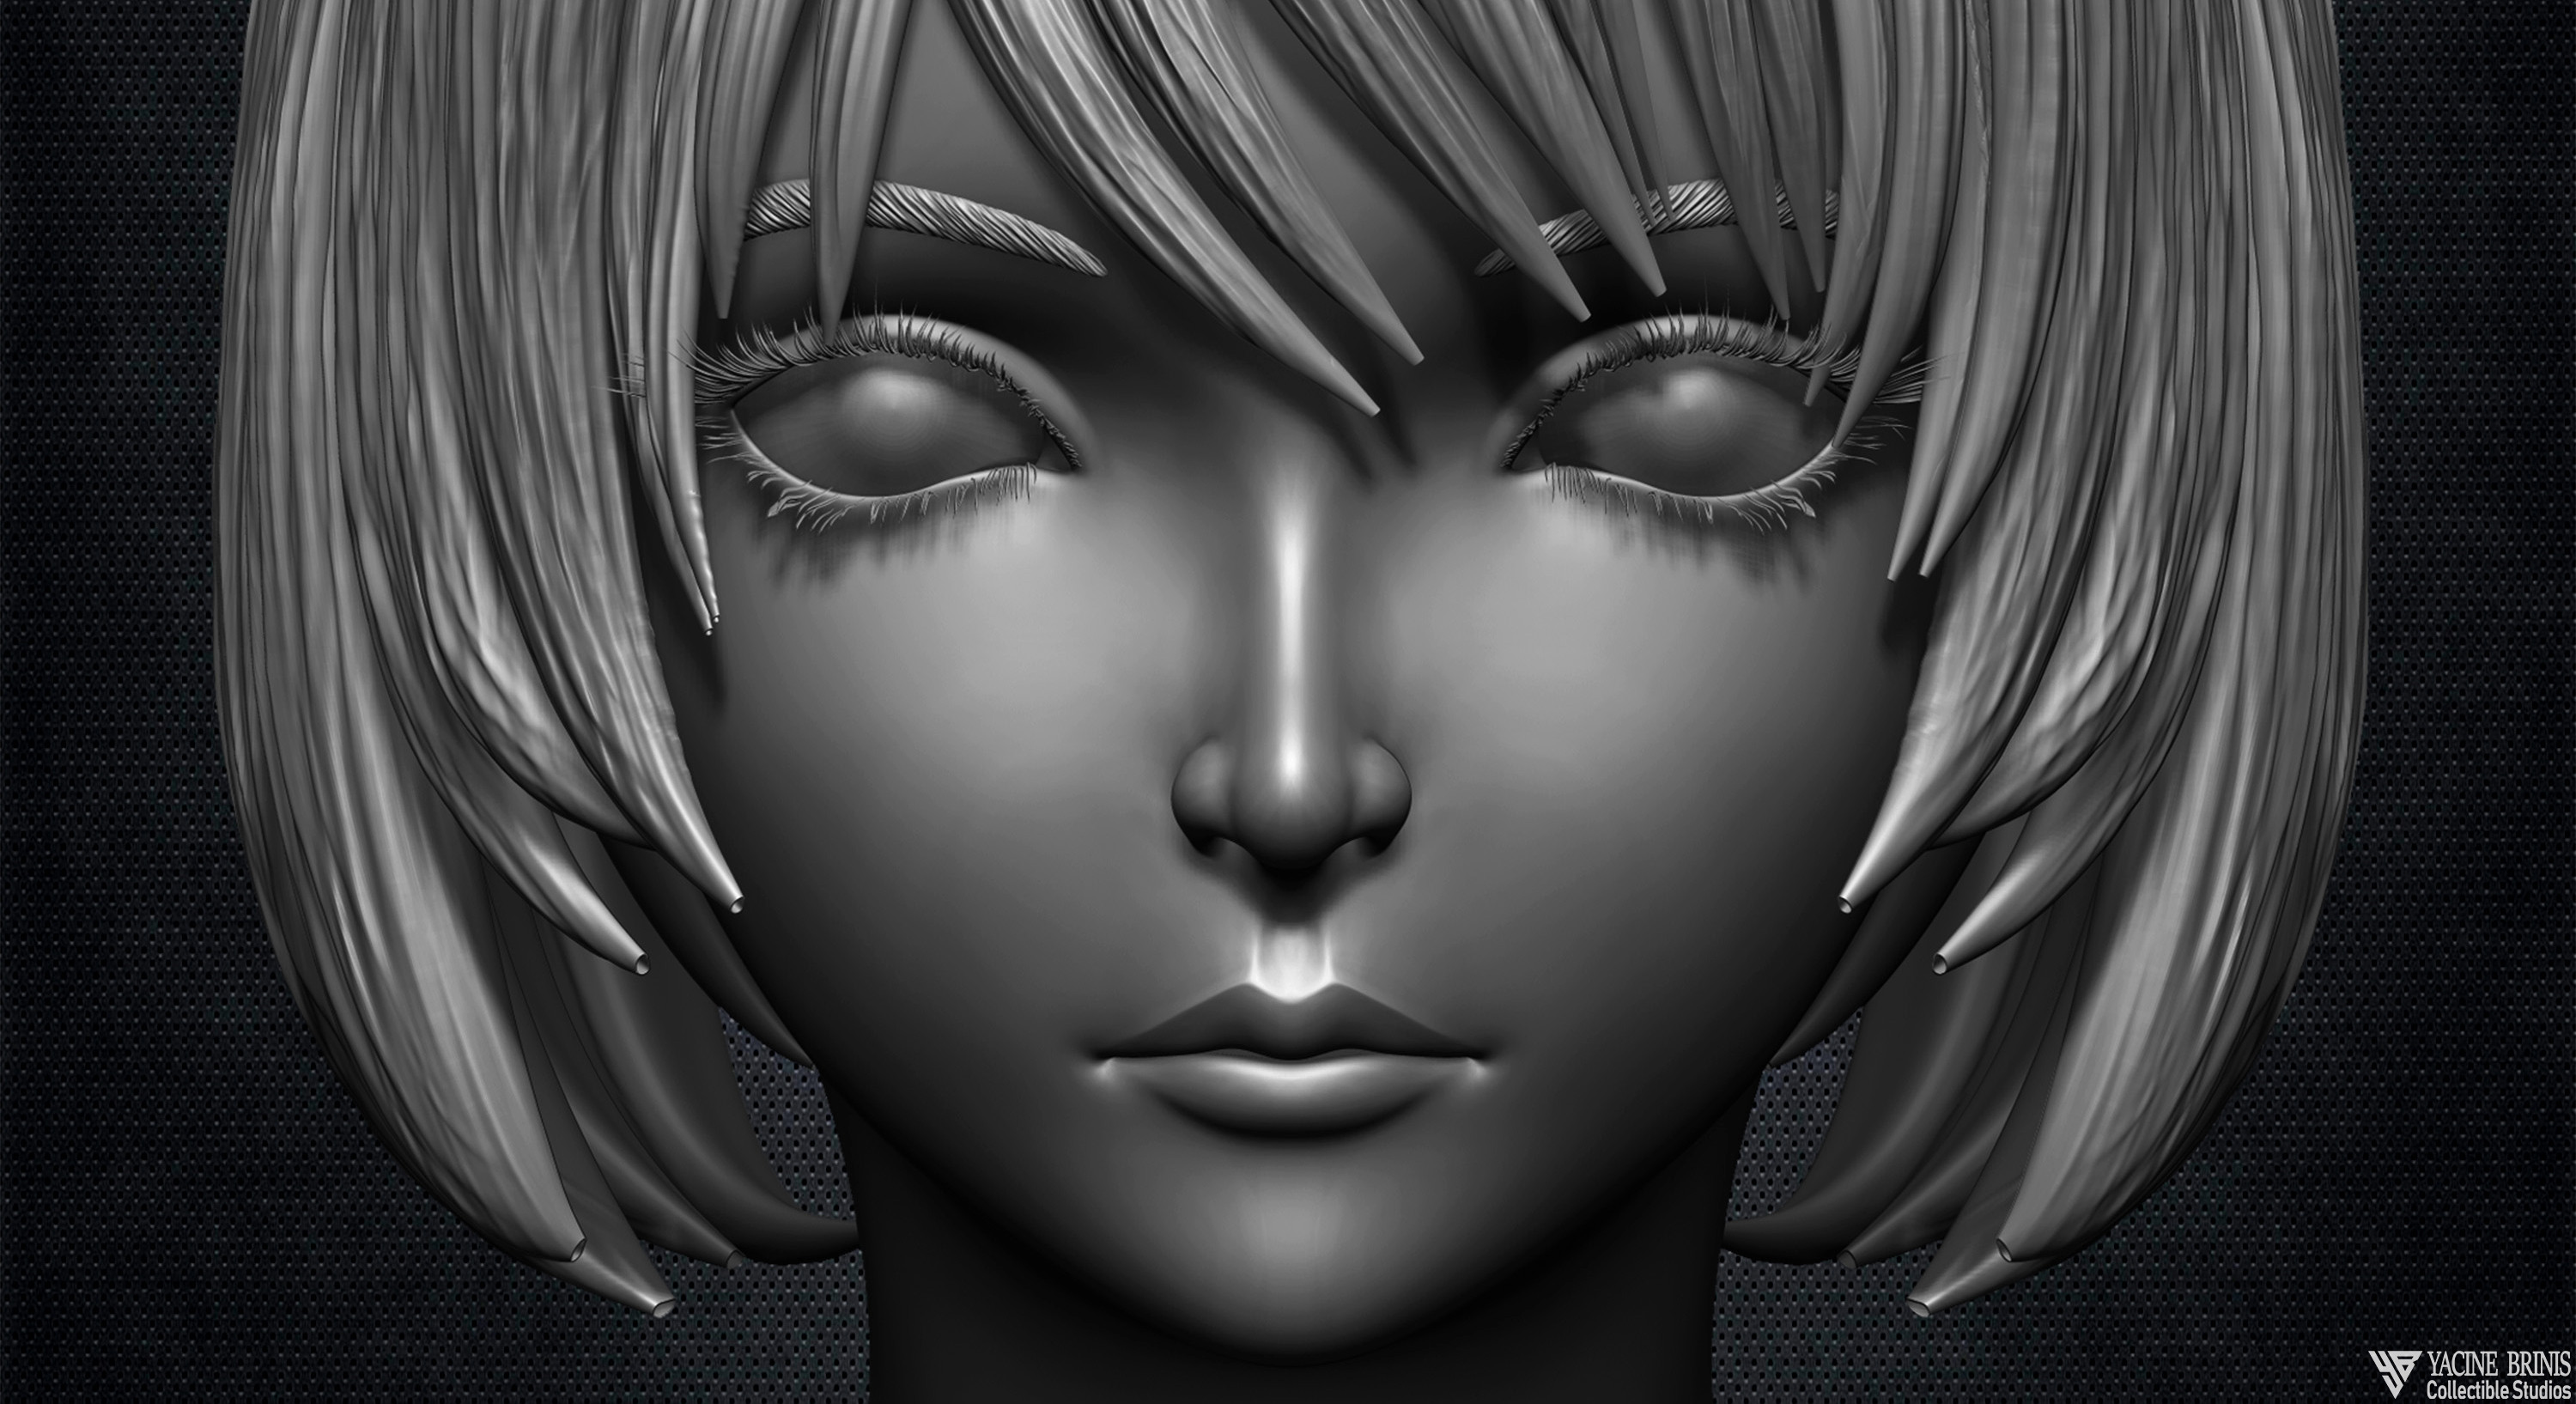 Anime Head Angles Perspective by Lairam on DeviantArt